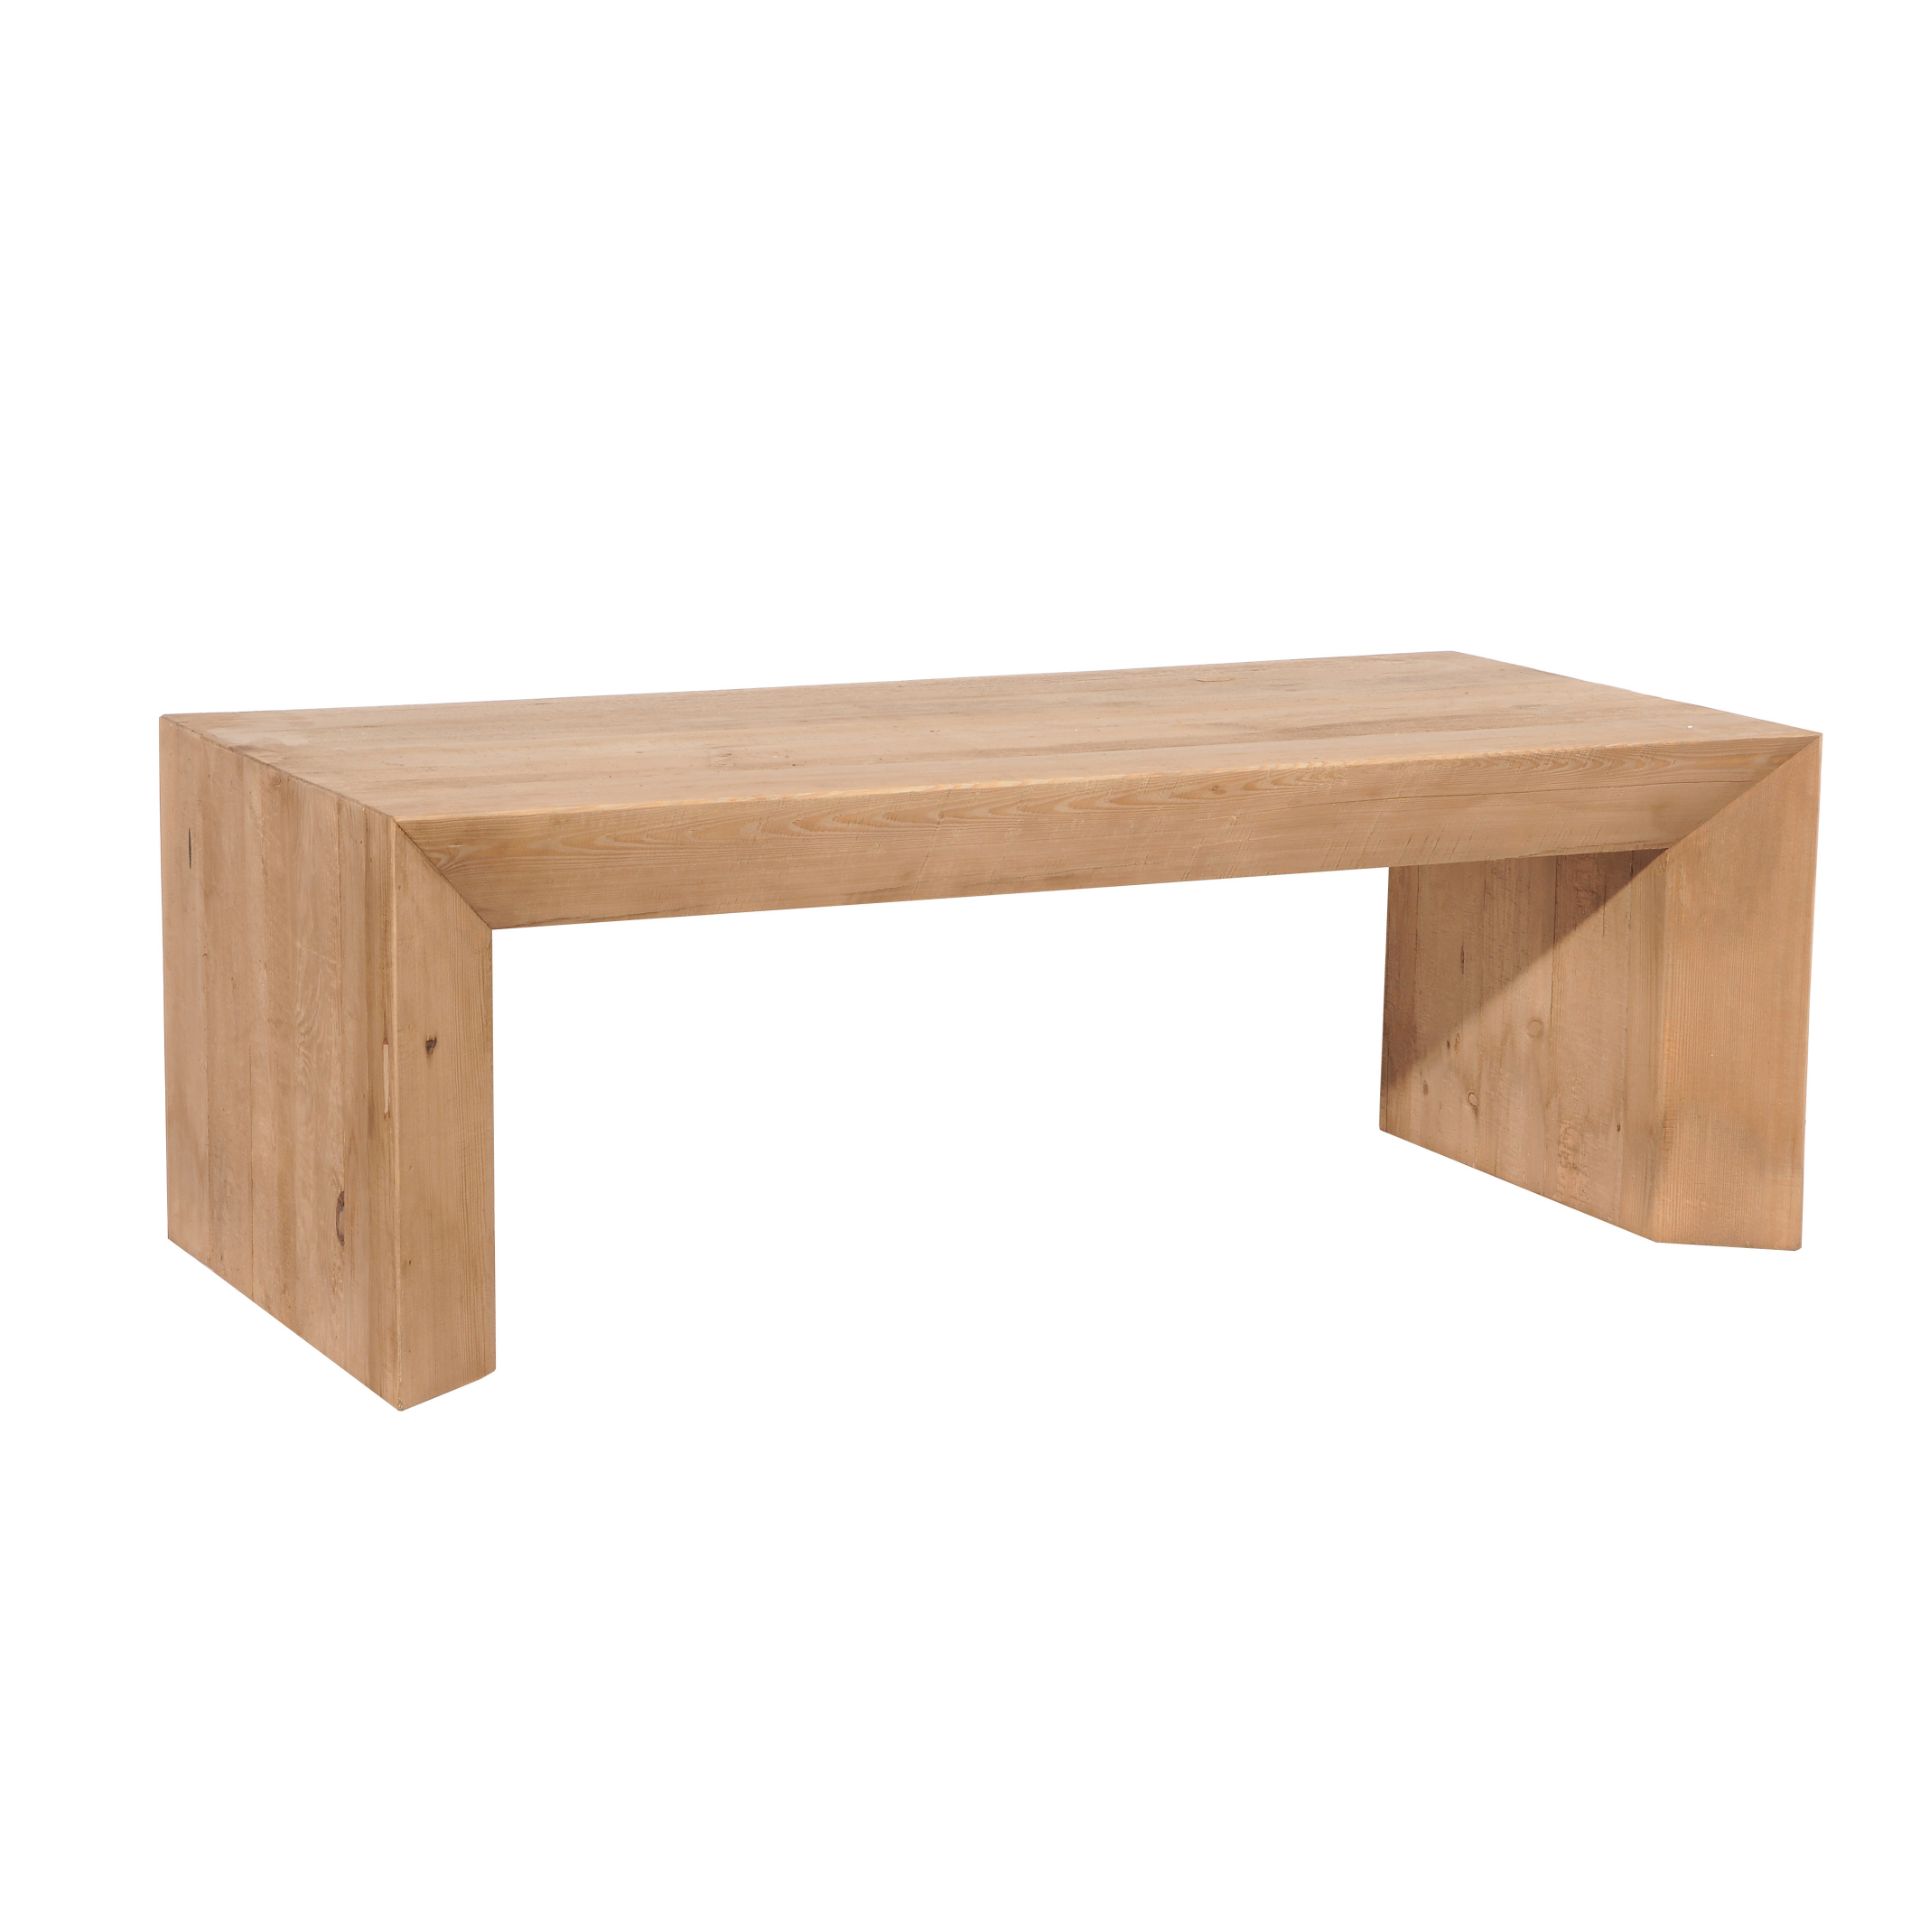 Canted Coffee Table 112x56cm Genuine English Reclaimed Timber 112x56x43.2cm RRP £ 2178